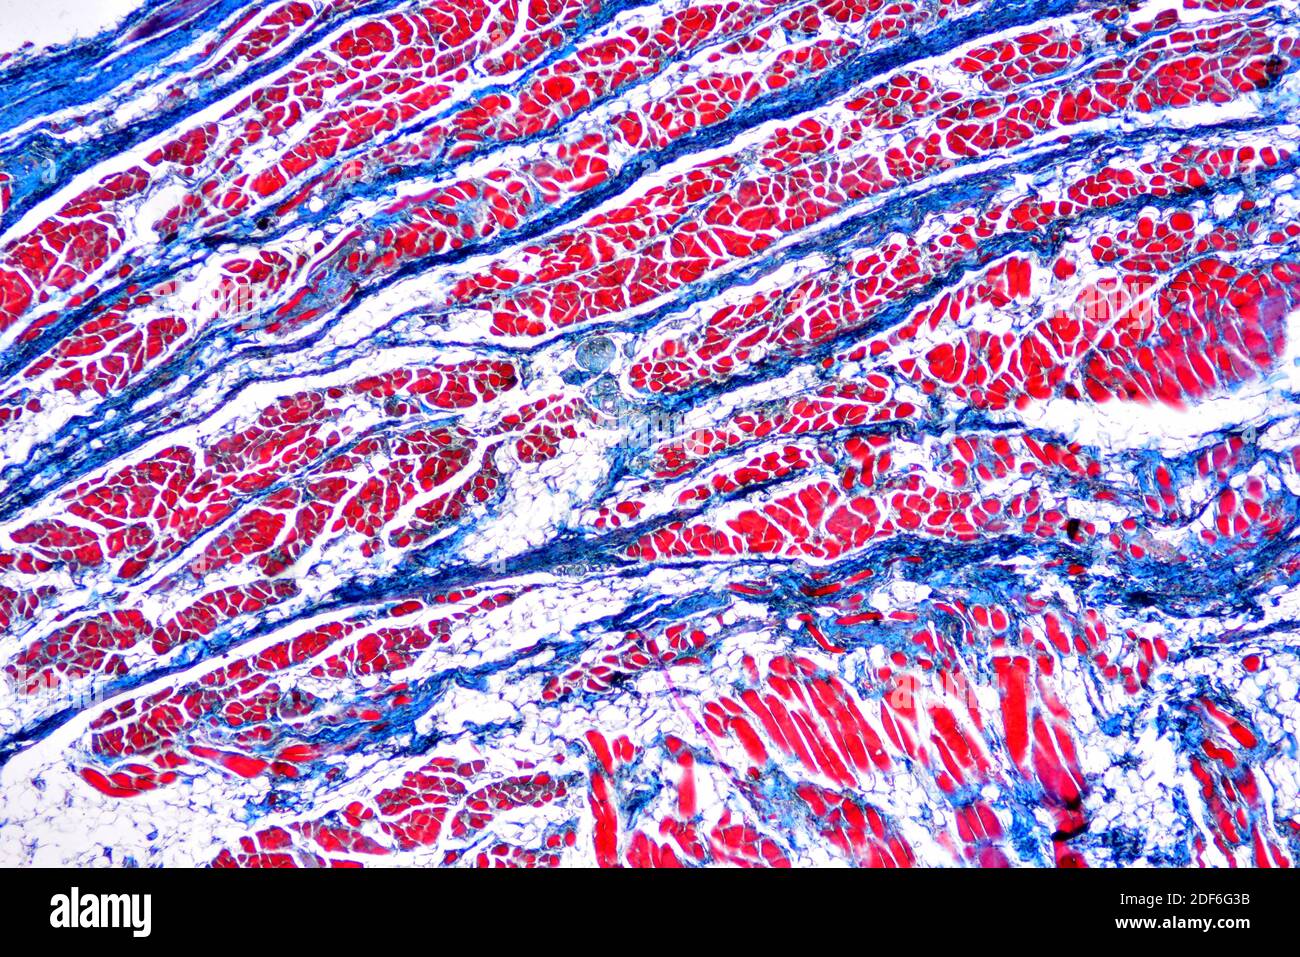 Rectum (large intestine) showing adipose, connective and muscular tissues. Optical microscope X40. Stock Photo